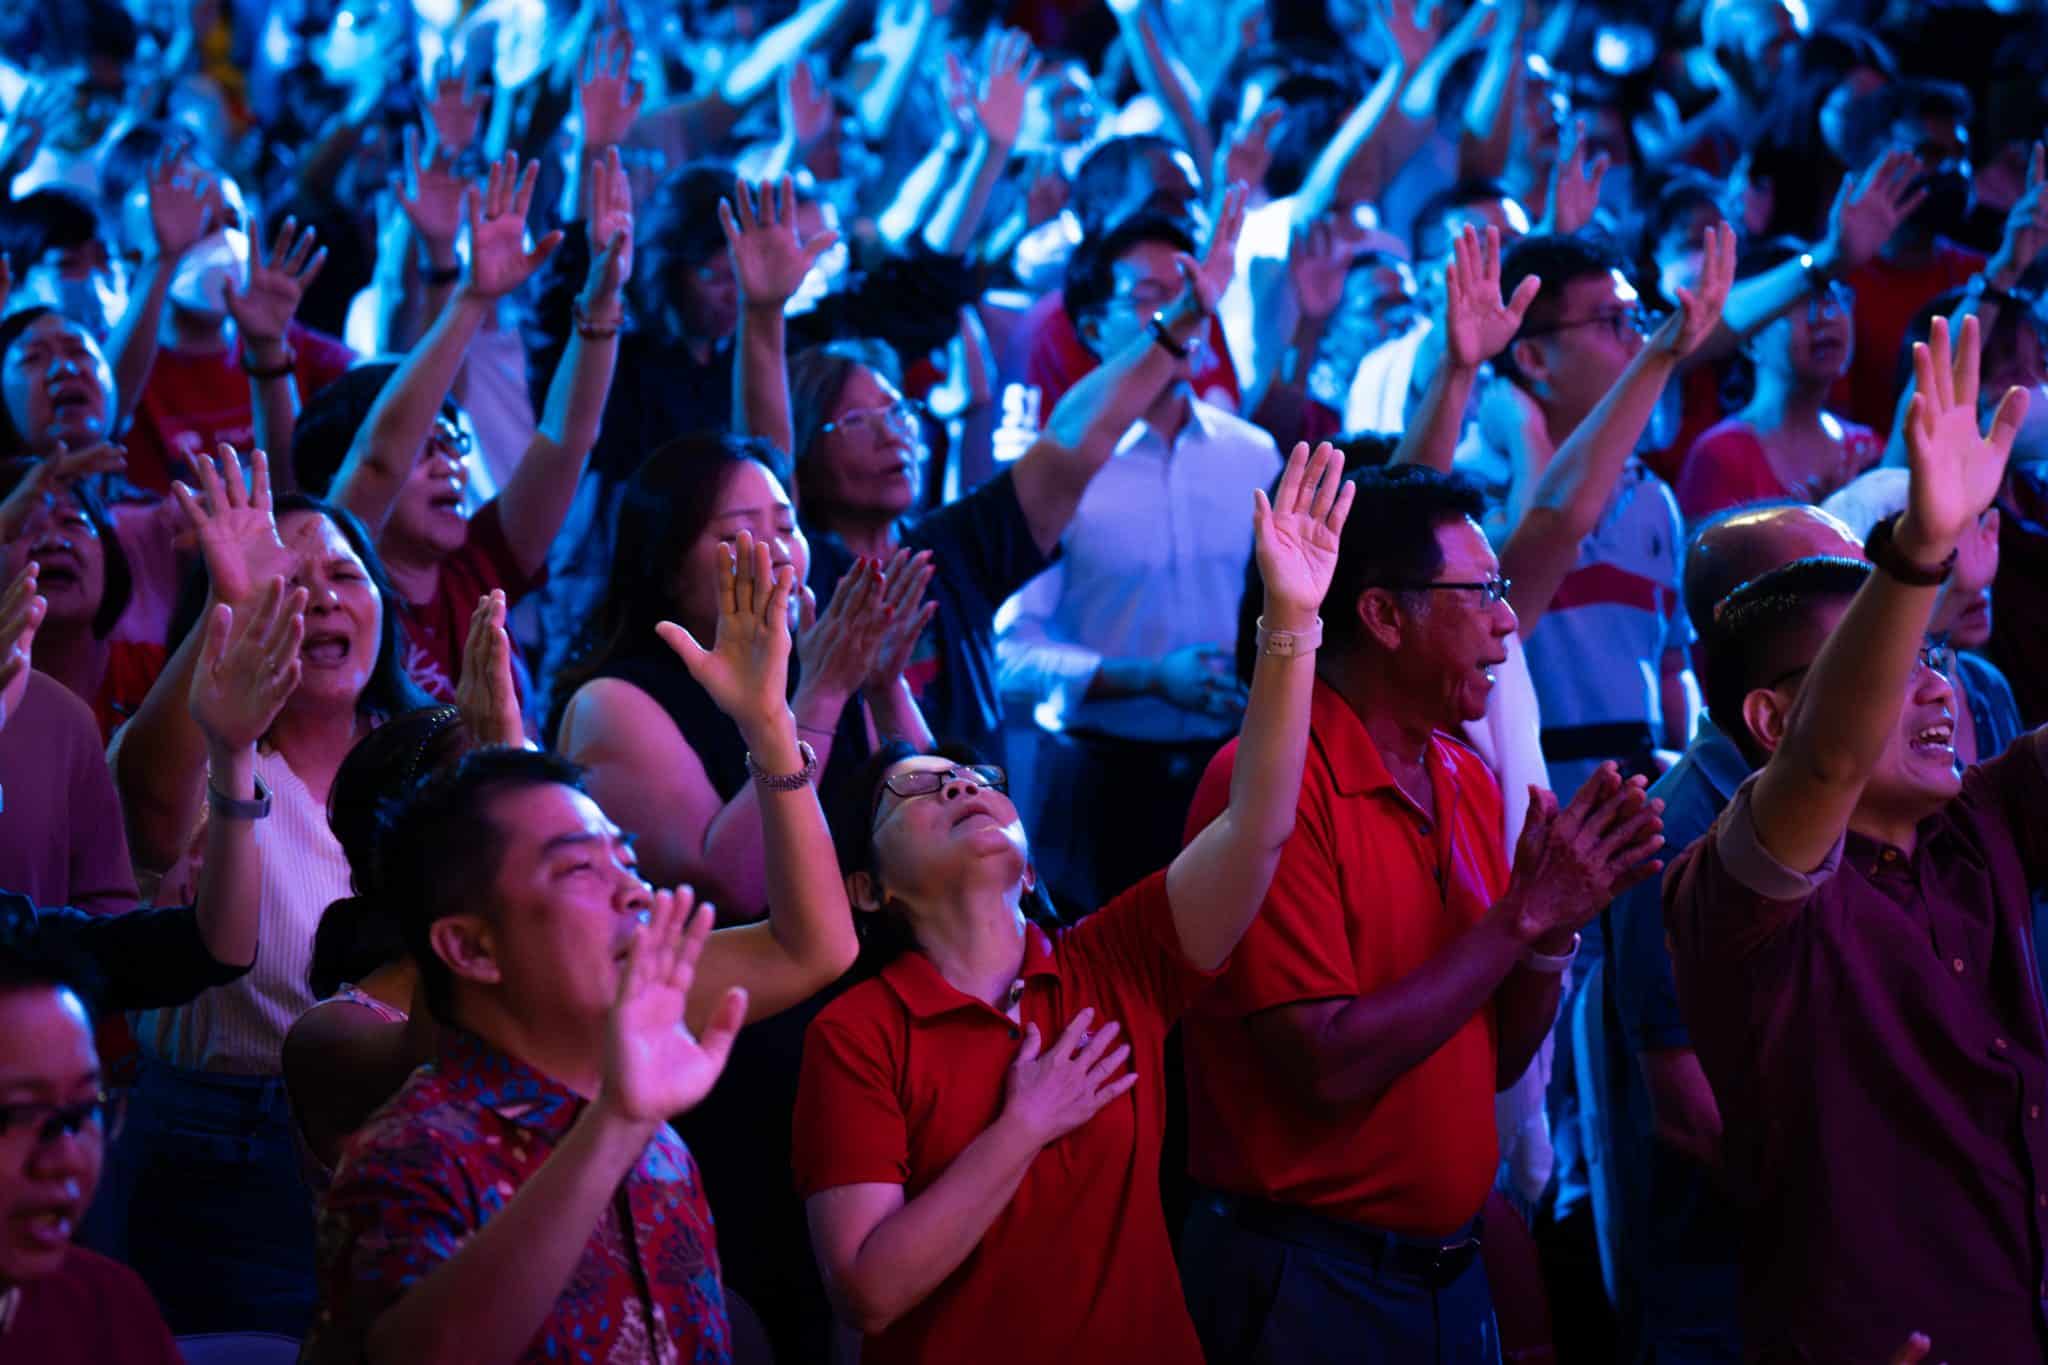 The congregation at Bethesda Bedok-Tampines Church for Day of His Power 2023 were led in worship by a band comprising members from 4 Eastern churches. Photo: Salt&Light